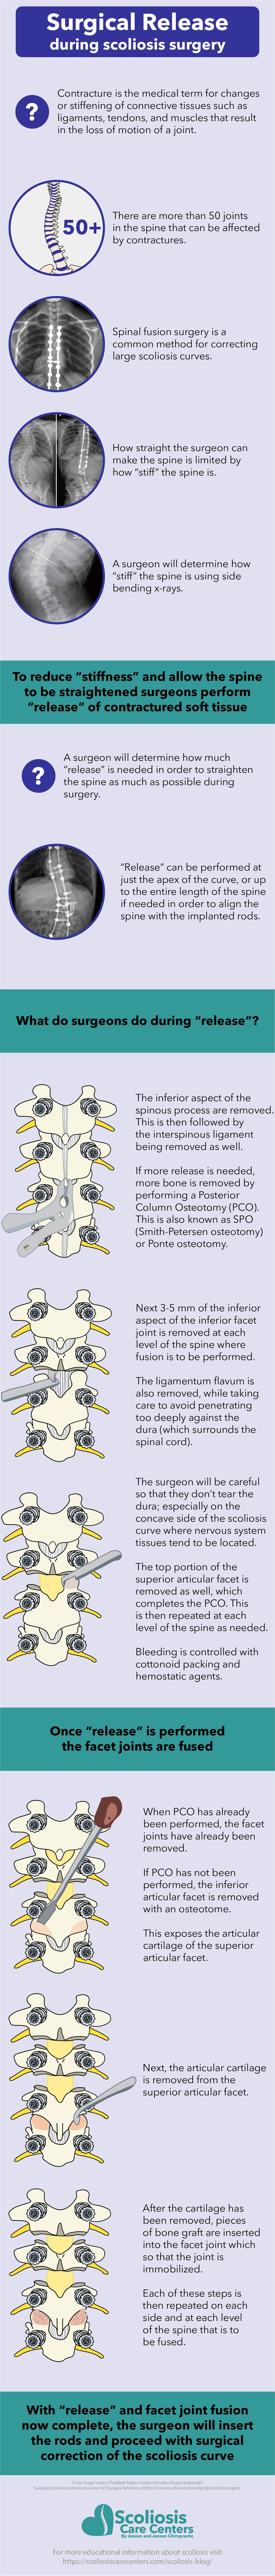 Infographic detailing surgical release of contractured soft tissue and facet joint fusion during scoliosis spinal fusion surgery